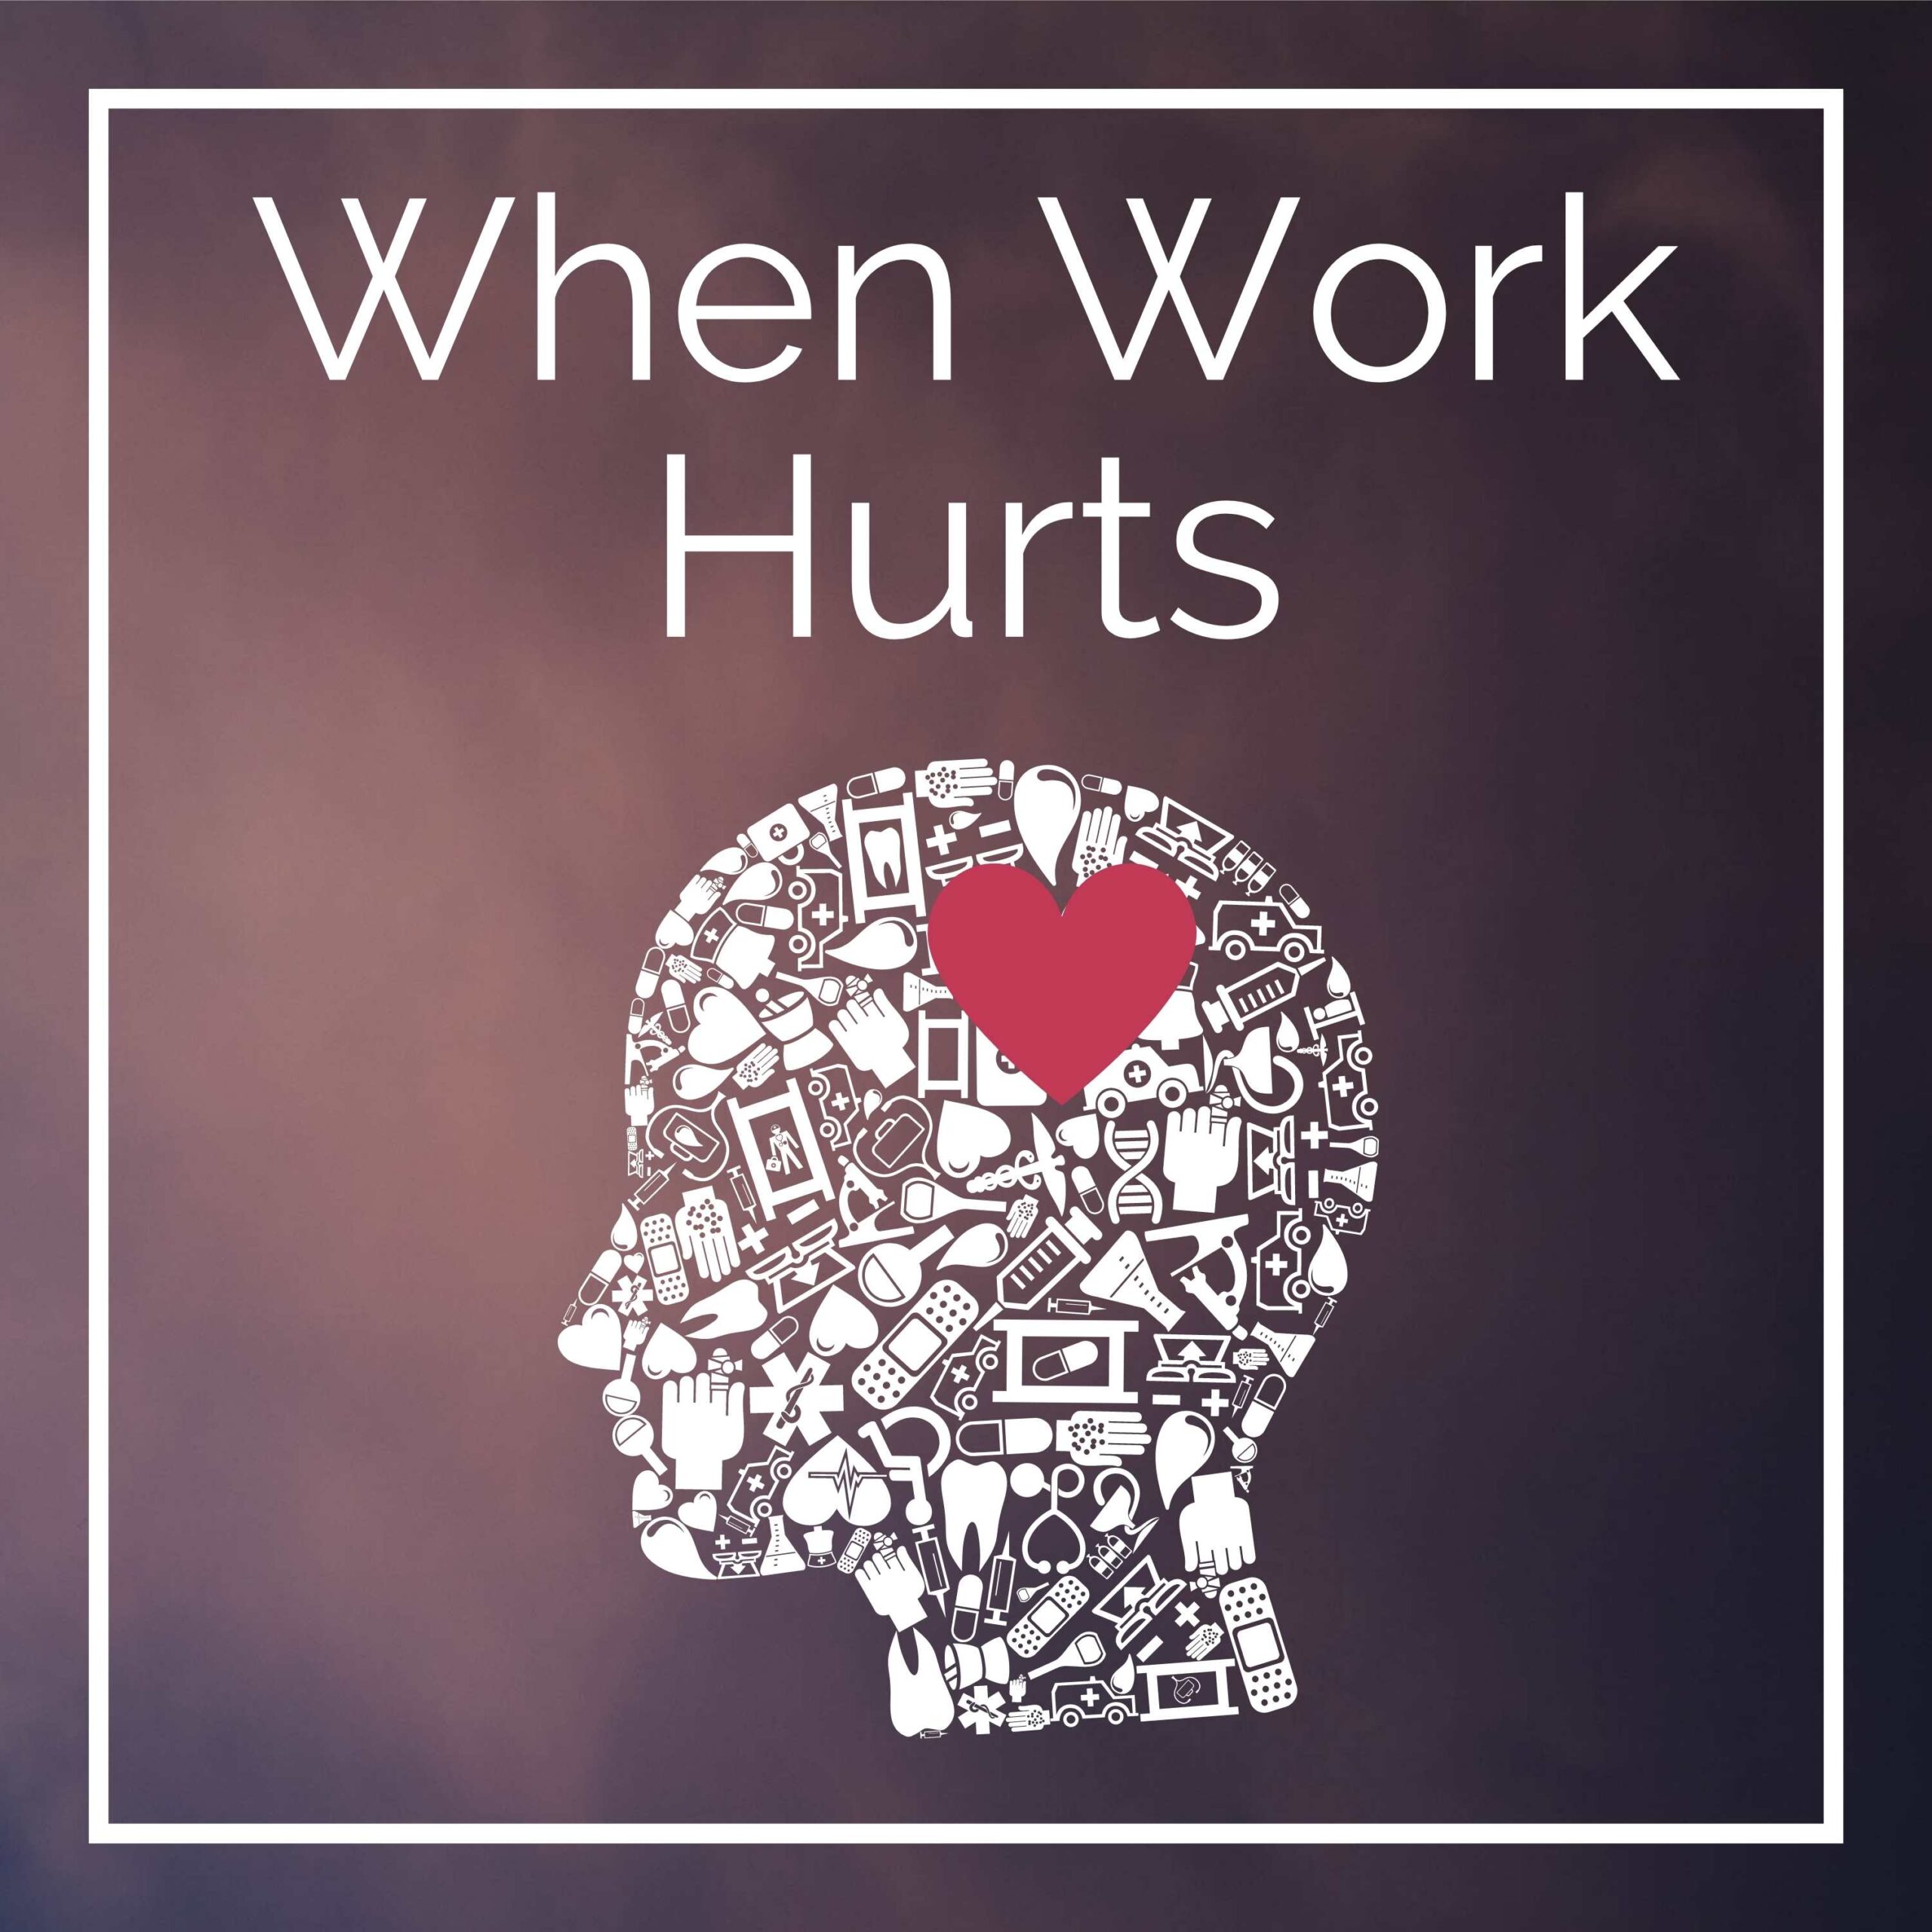 When Work Hurts Podcast cover art - the shape of a head in profile made up of medical icons with a read heart in the centre, under the words "When Work Hurts"